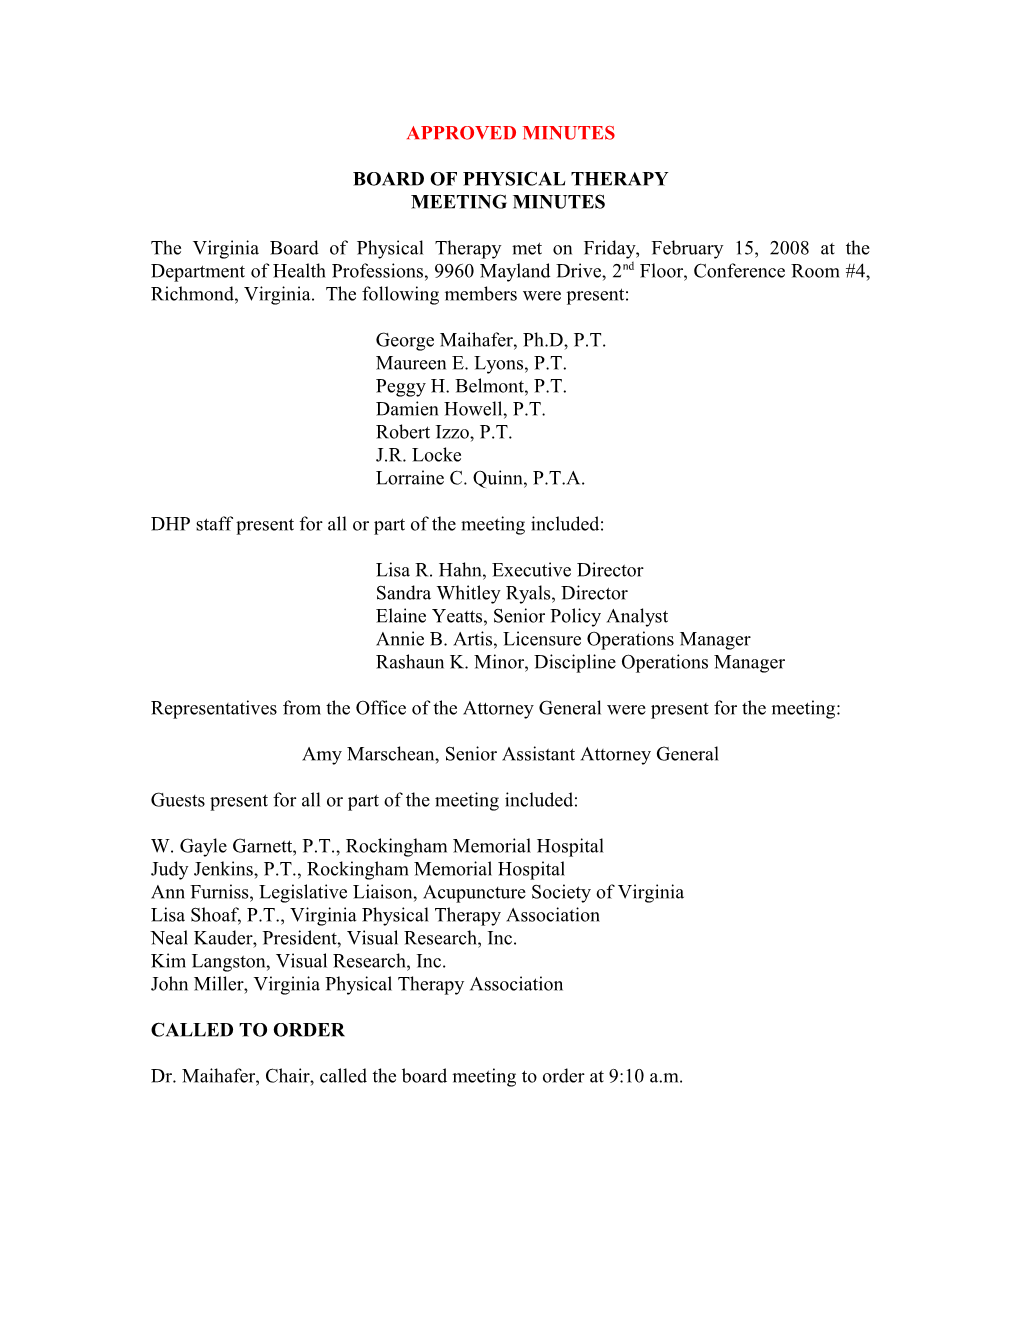 Board of Physical Therapy - Board Meeting Minutes - 2/15/2008